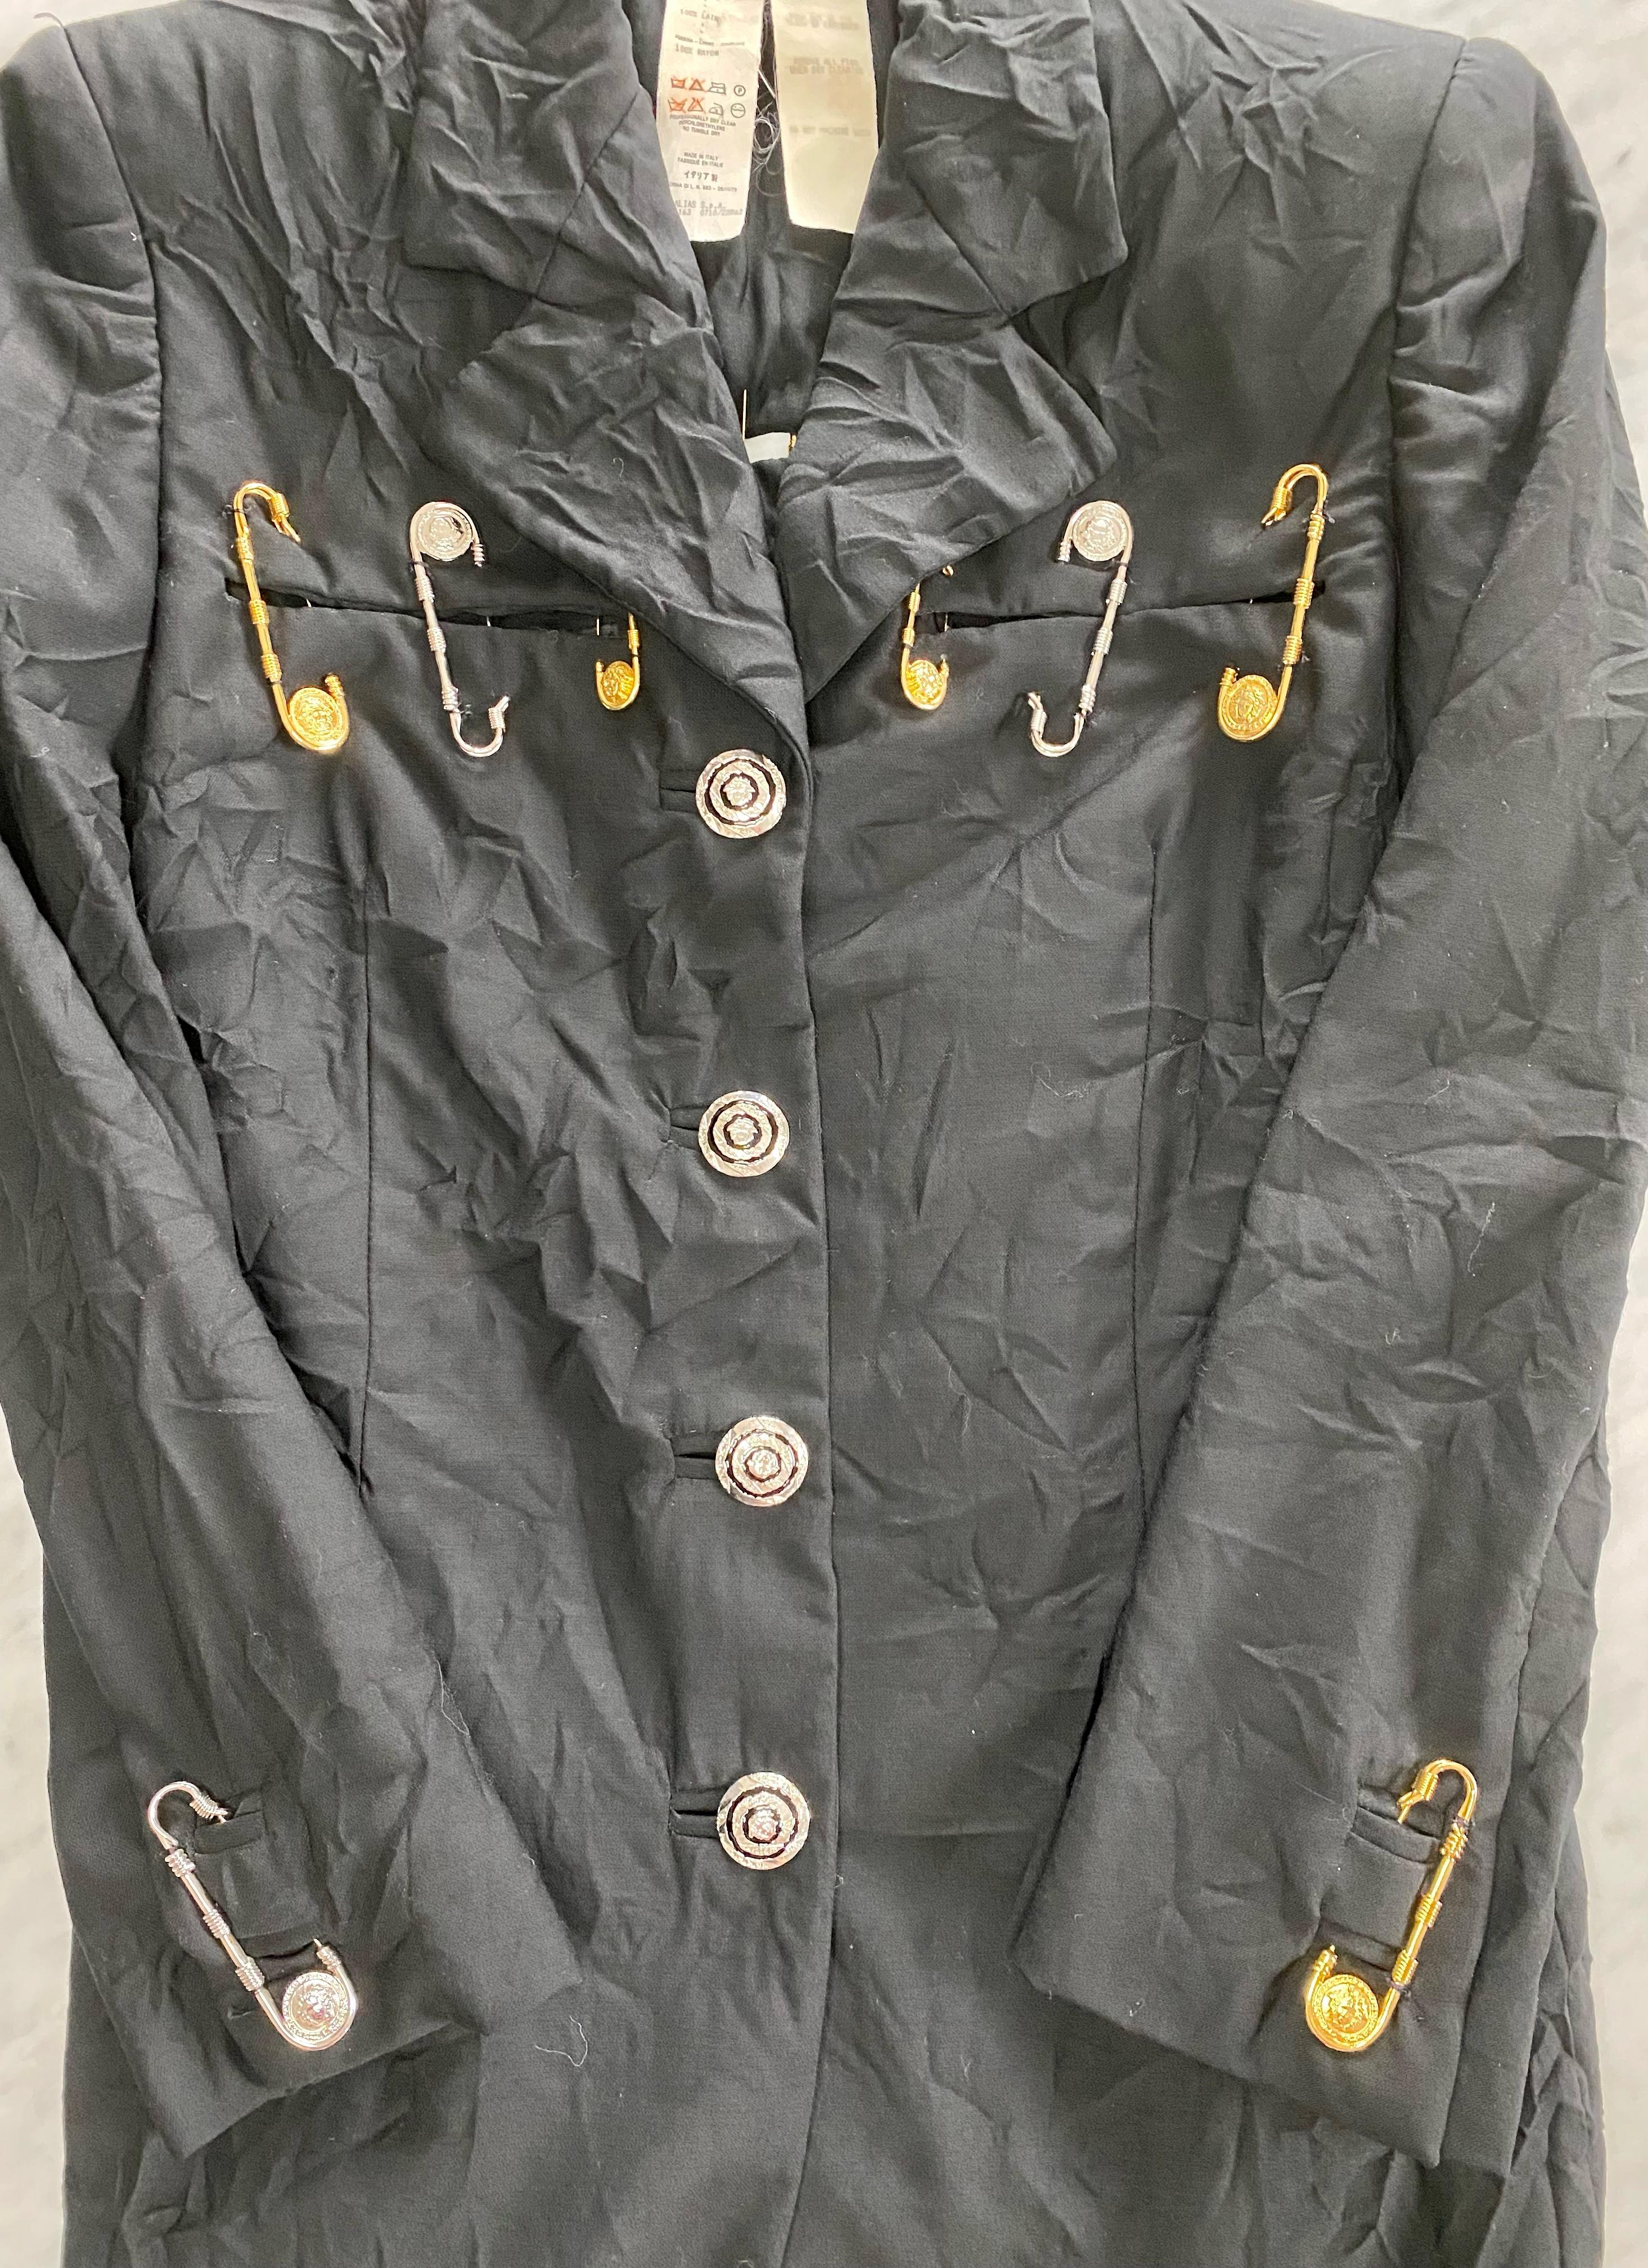 S/S 1994 Gianni Versace Couture Medusa Safety Pin Blazer Runway  For Sale 1